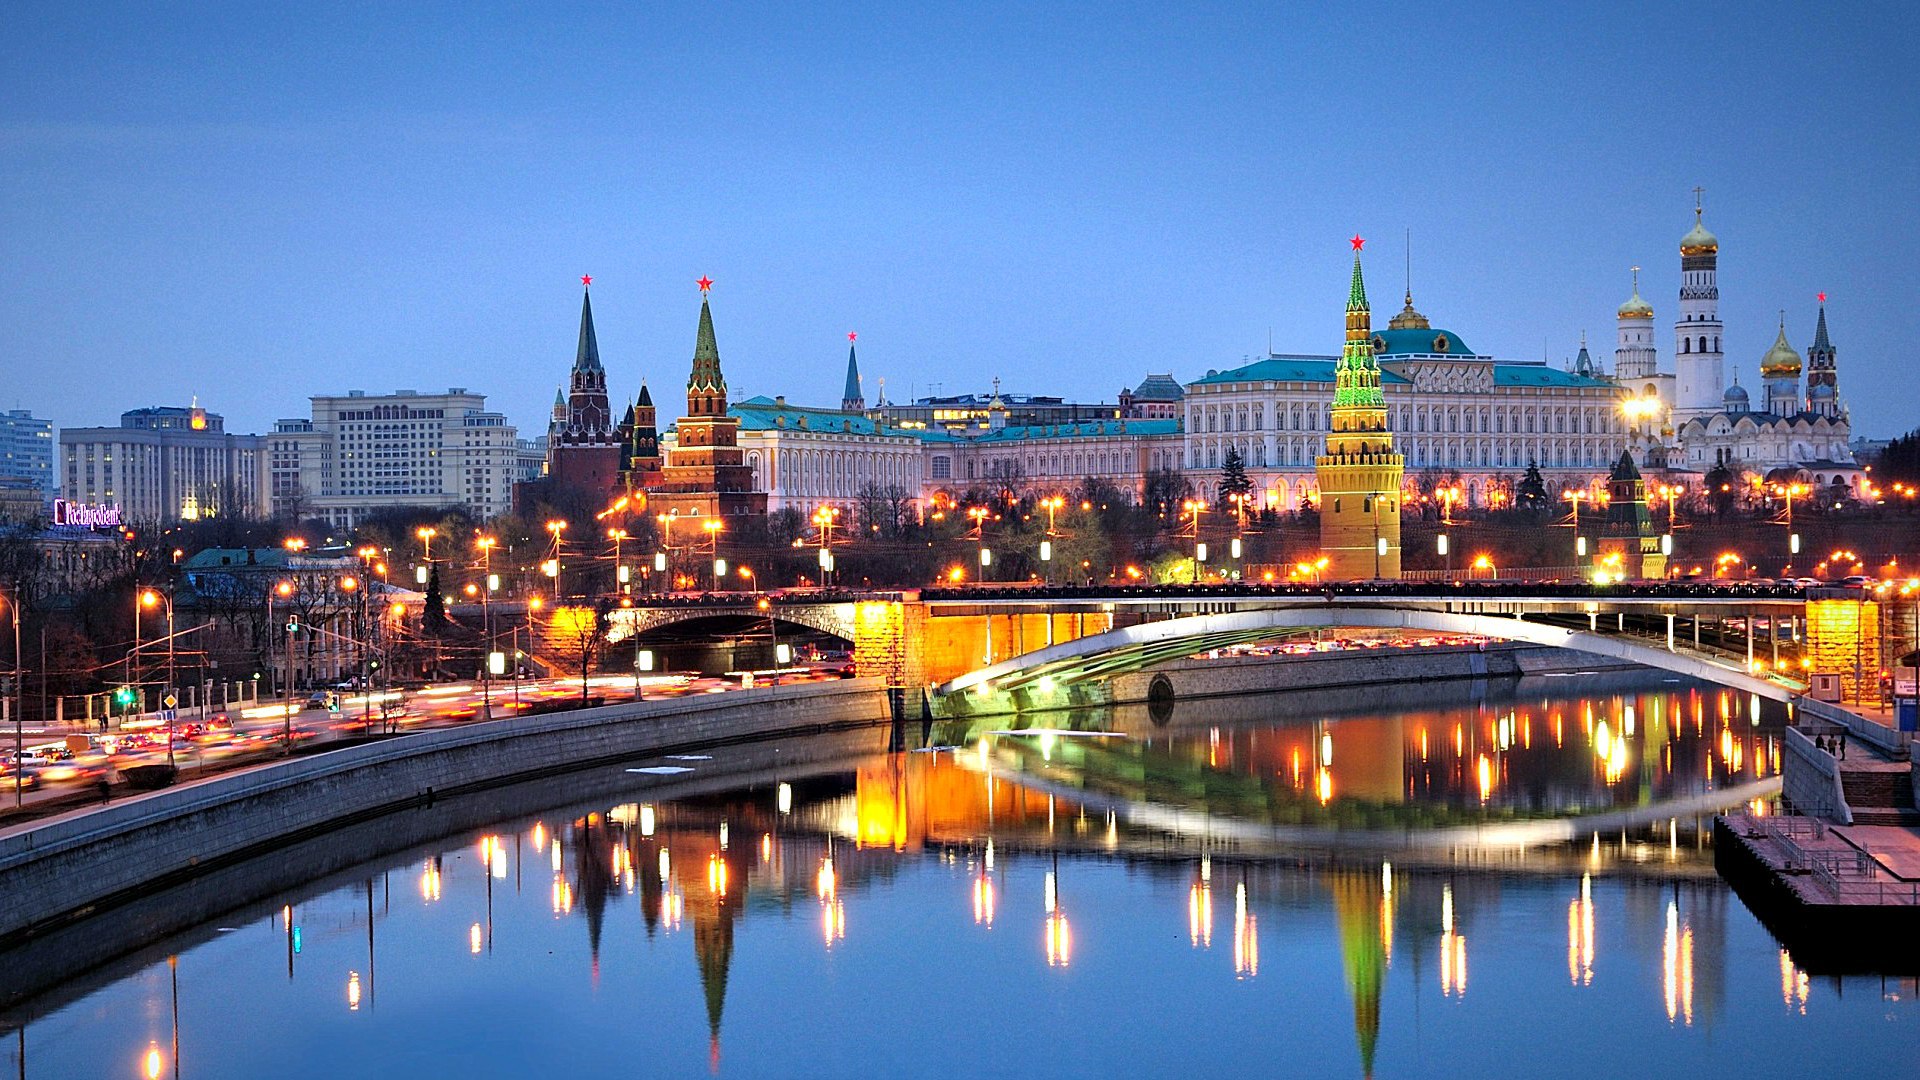 Moscow is the capital of the Russian Federation wallpapers and images